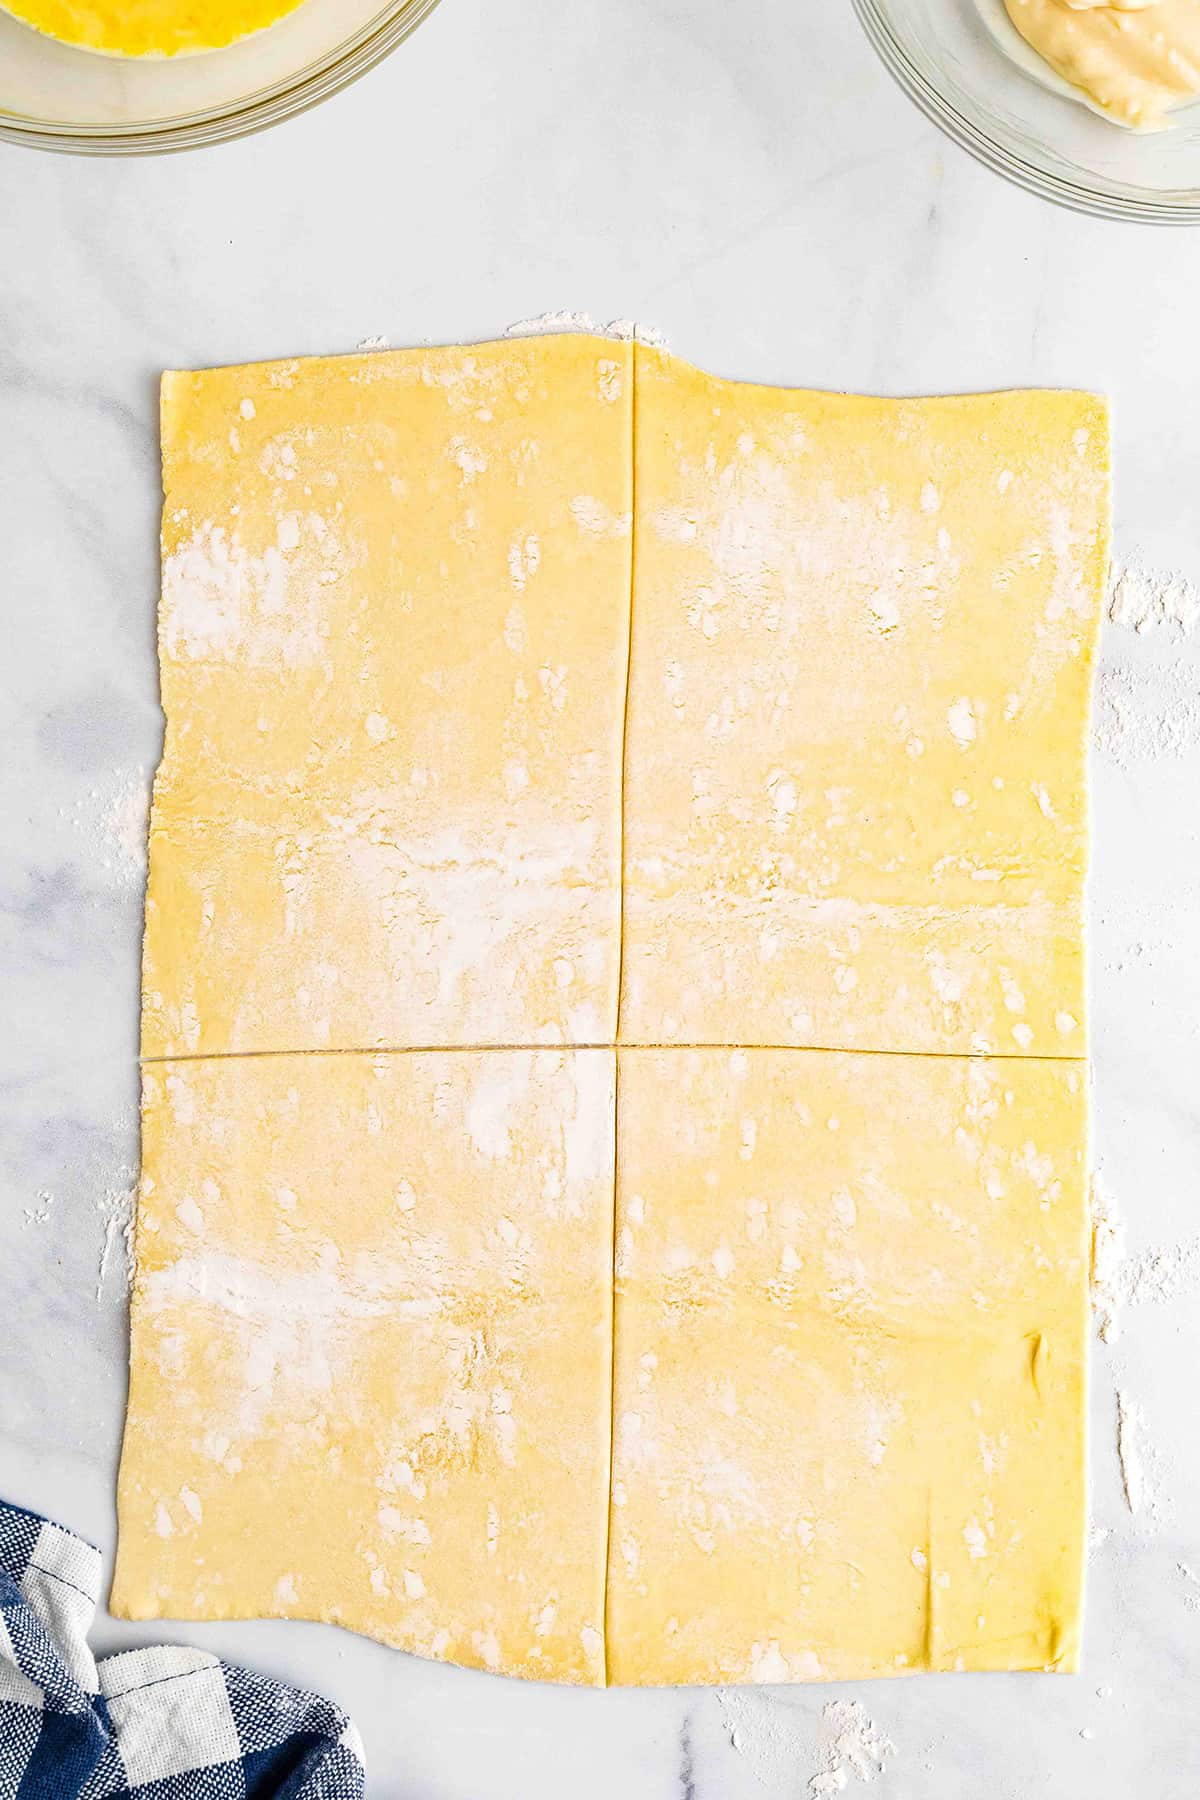 Puff pastry cut into 4 squares.